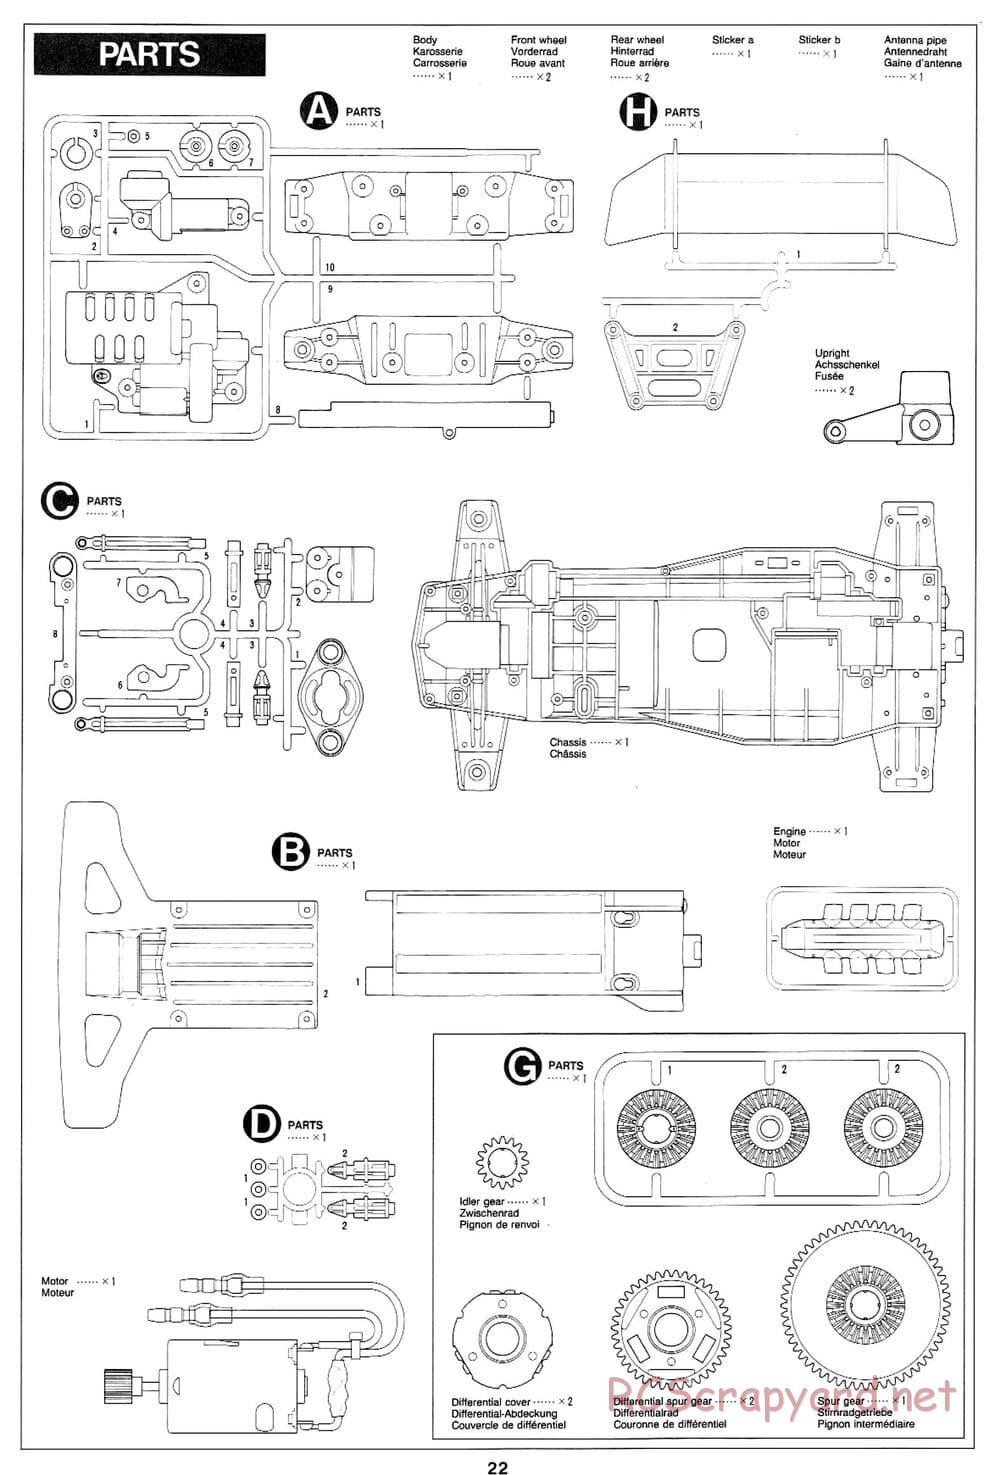 Tamiya - Wild Ceptor - Boy's 4WD Chassis - Manual - Page 22